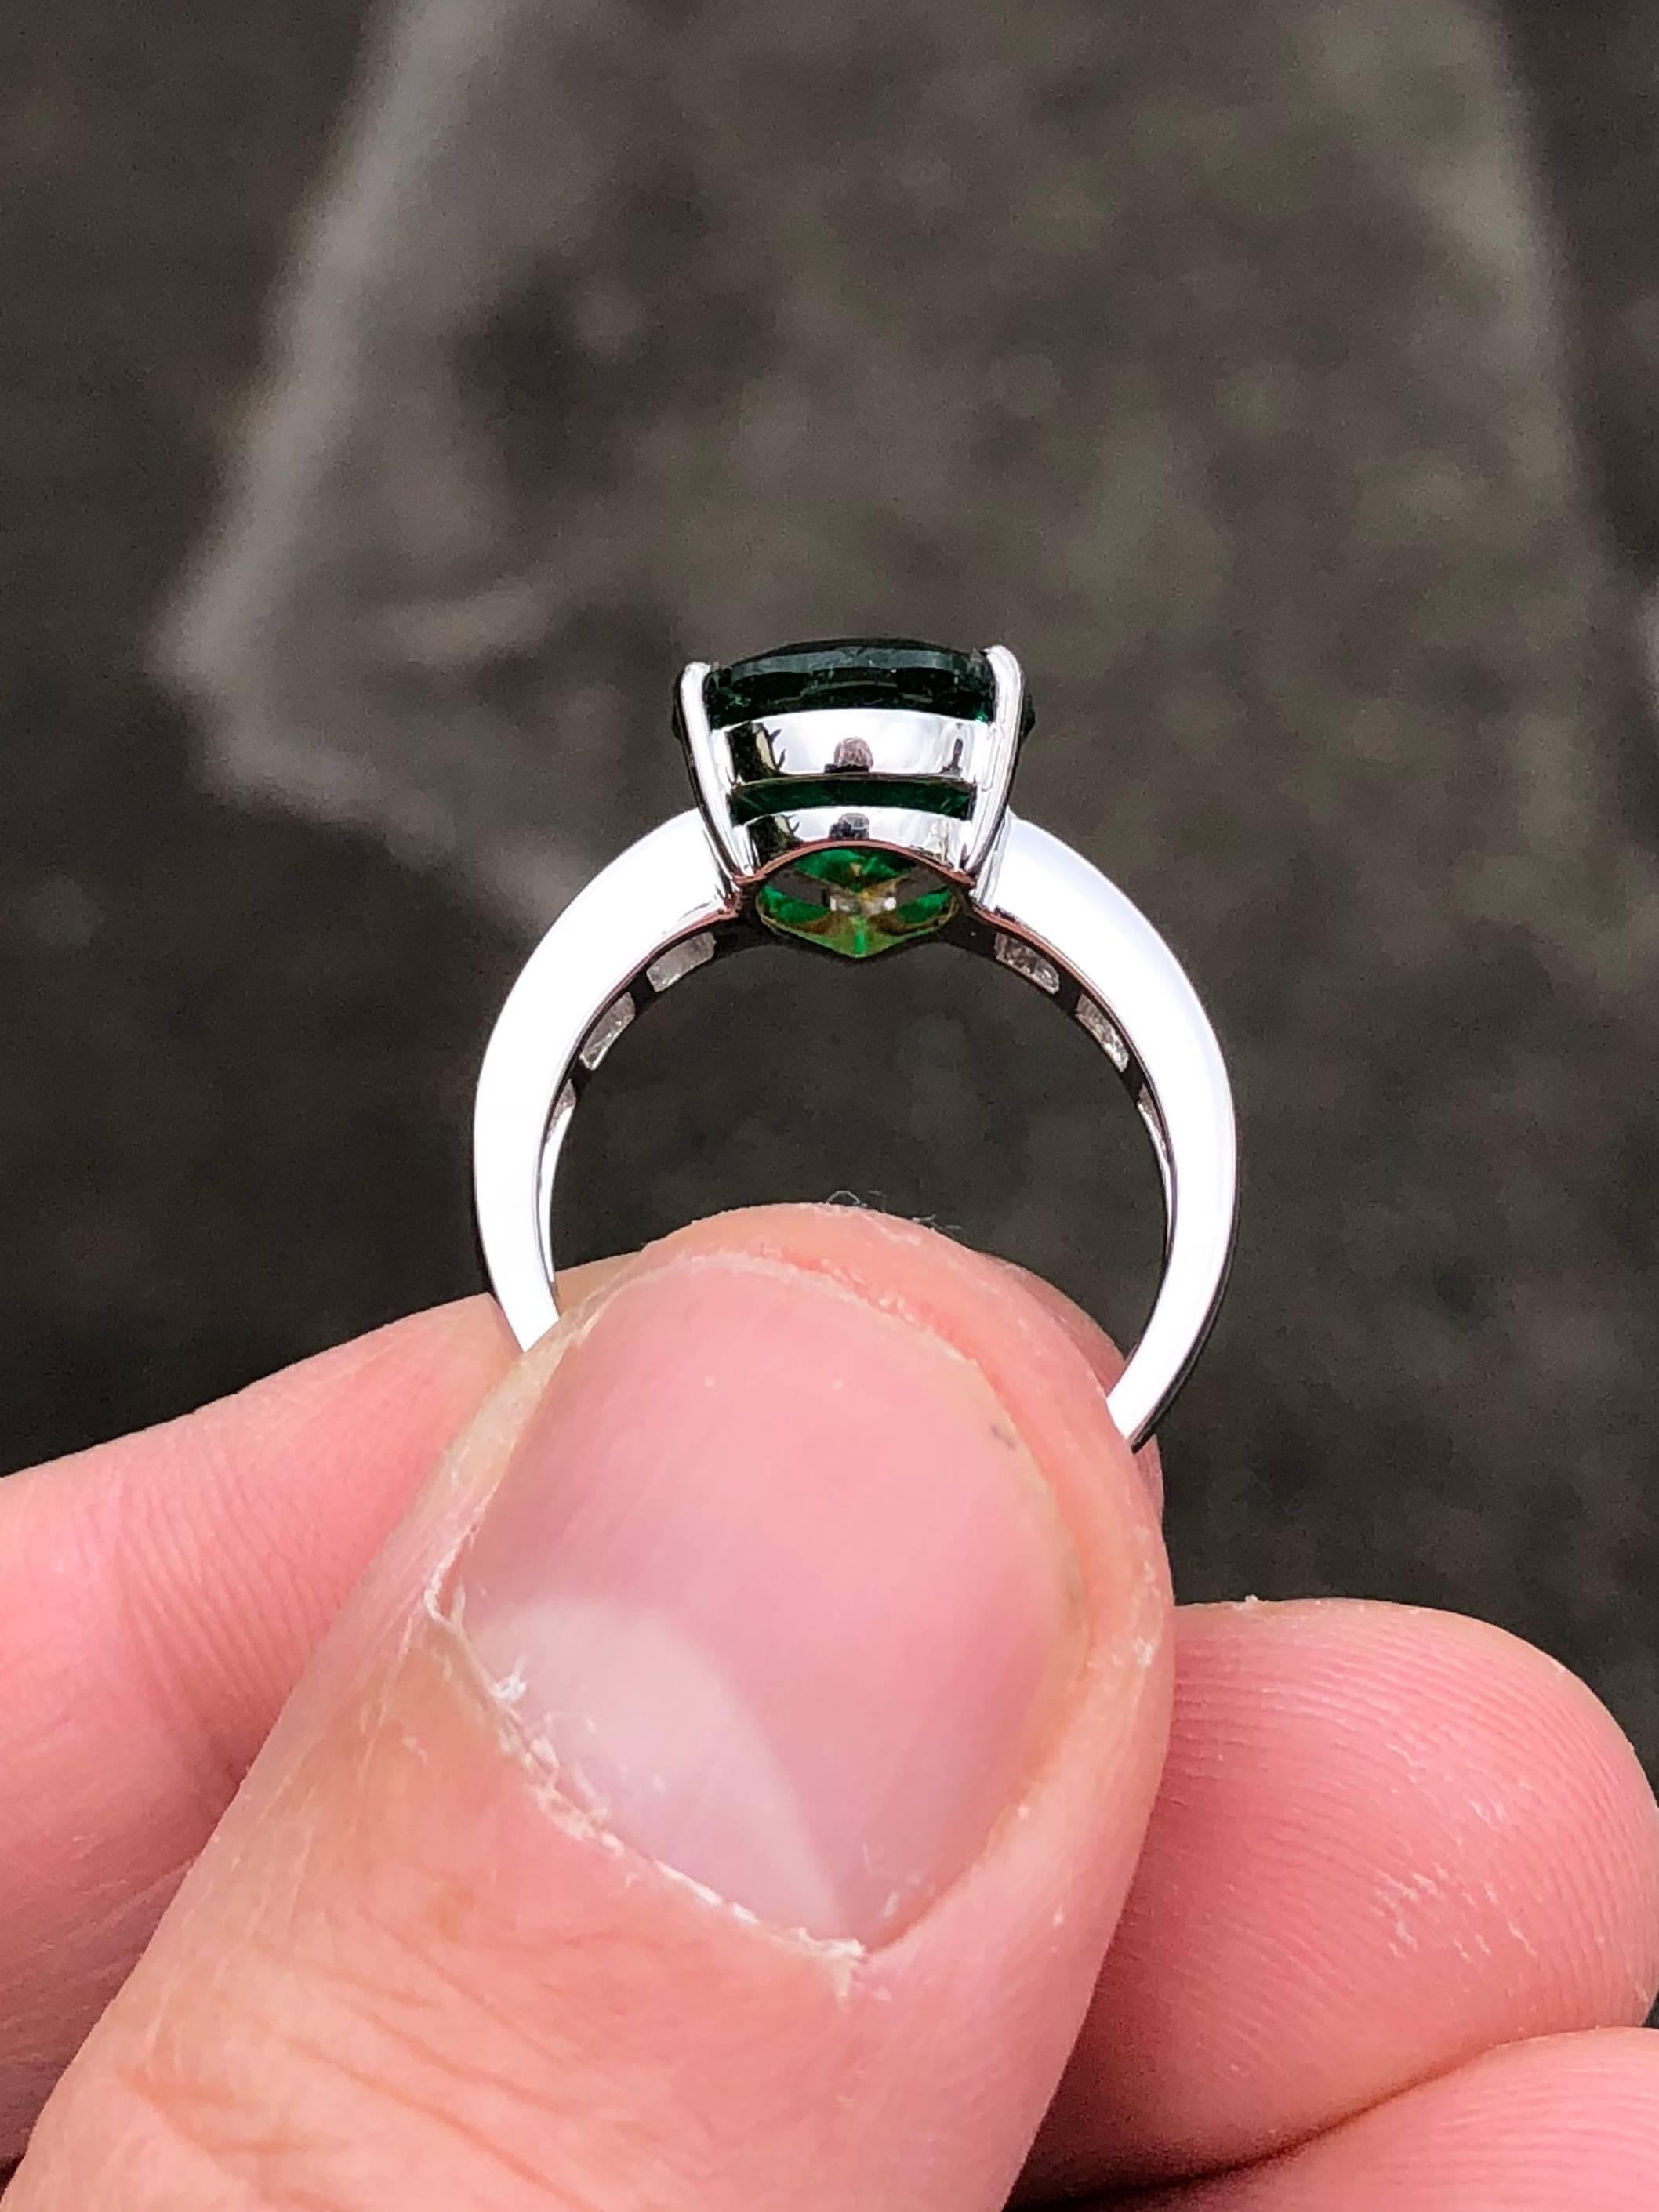 The centre stone of the ring is a beautiful 4 carat, fine Muzo Colombian emerald, certified by Gübelin Gem Lab, Lucerne, Switzerland. This piece is decorated with certified E colour, baguette cut diamonds and set in 18K white gold.